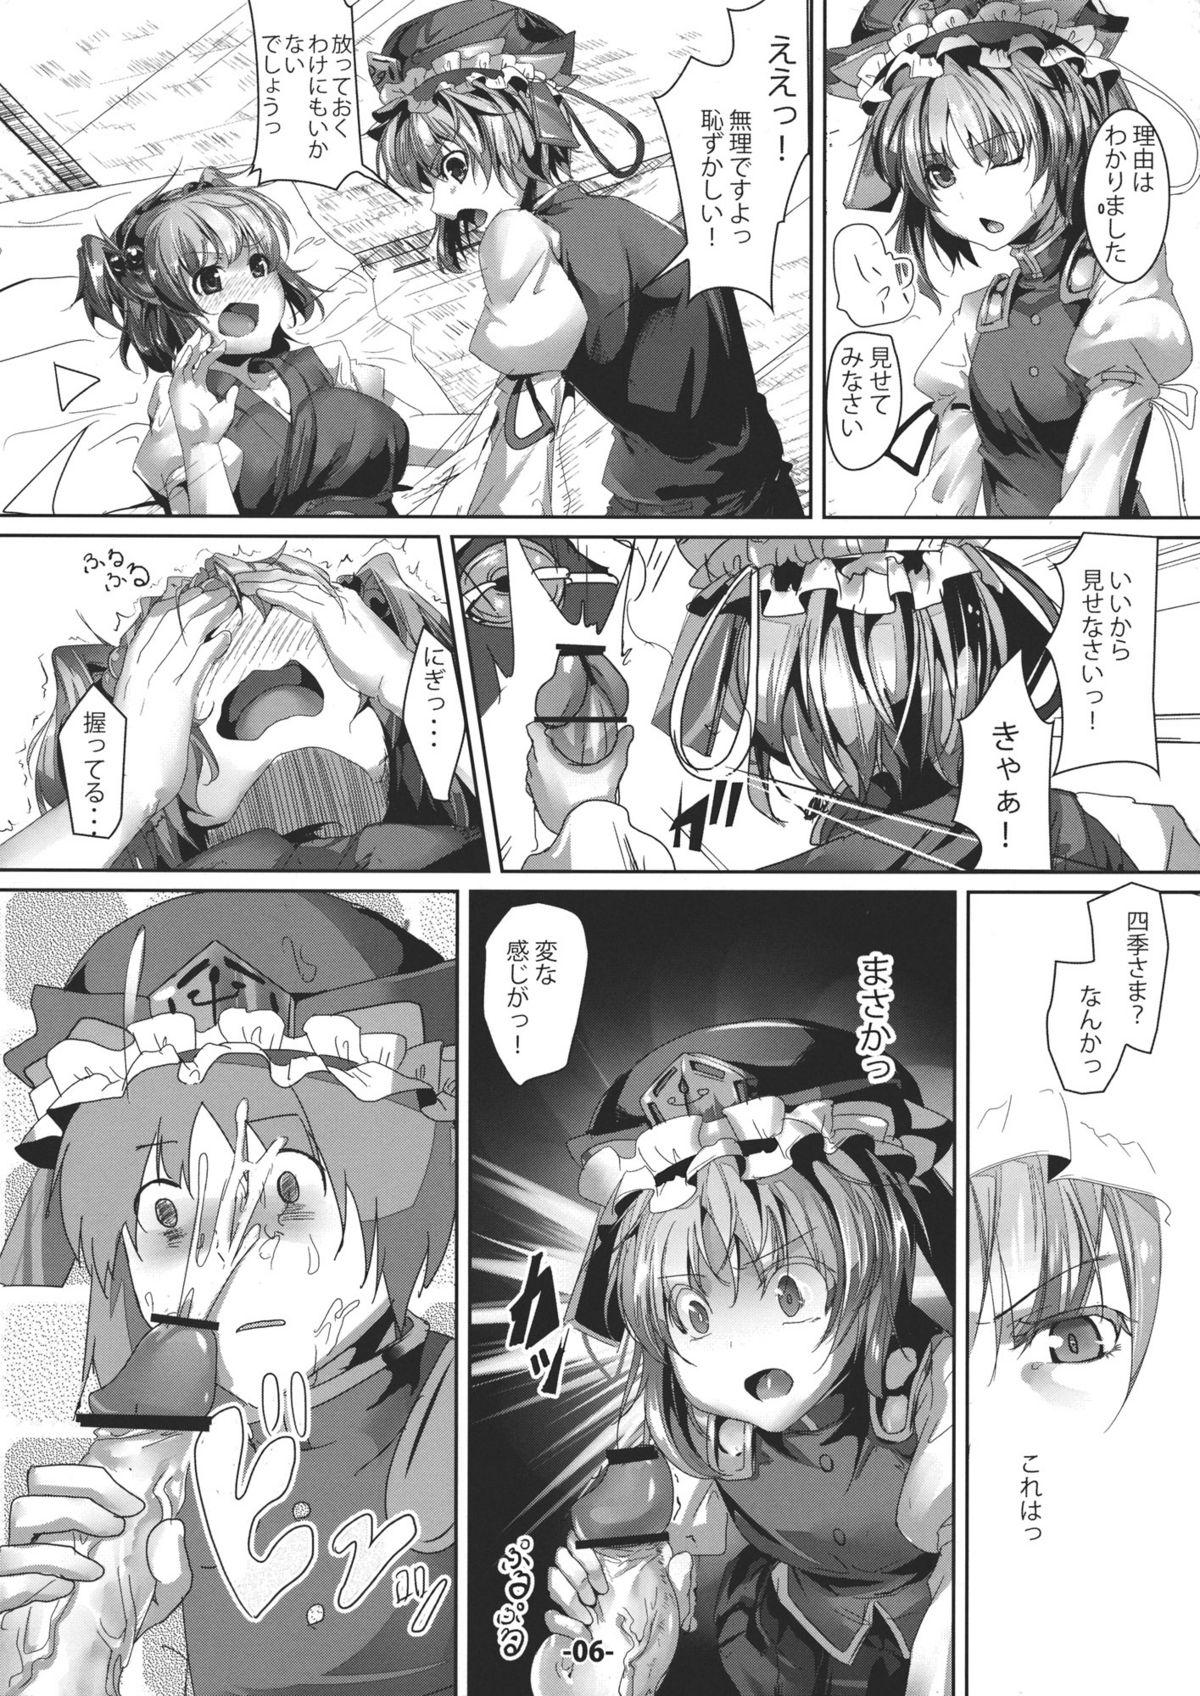 Dominicana Love of Life - Touhou project Boobs - Page 6